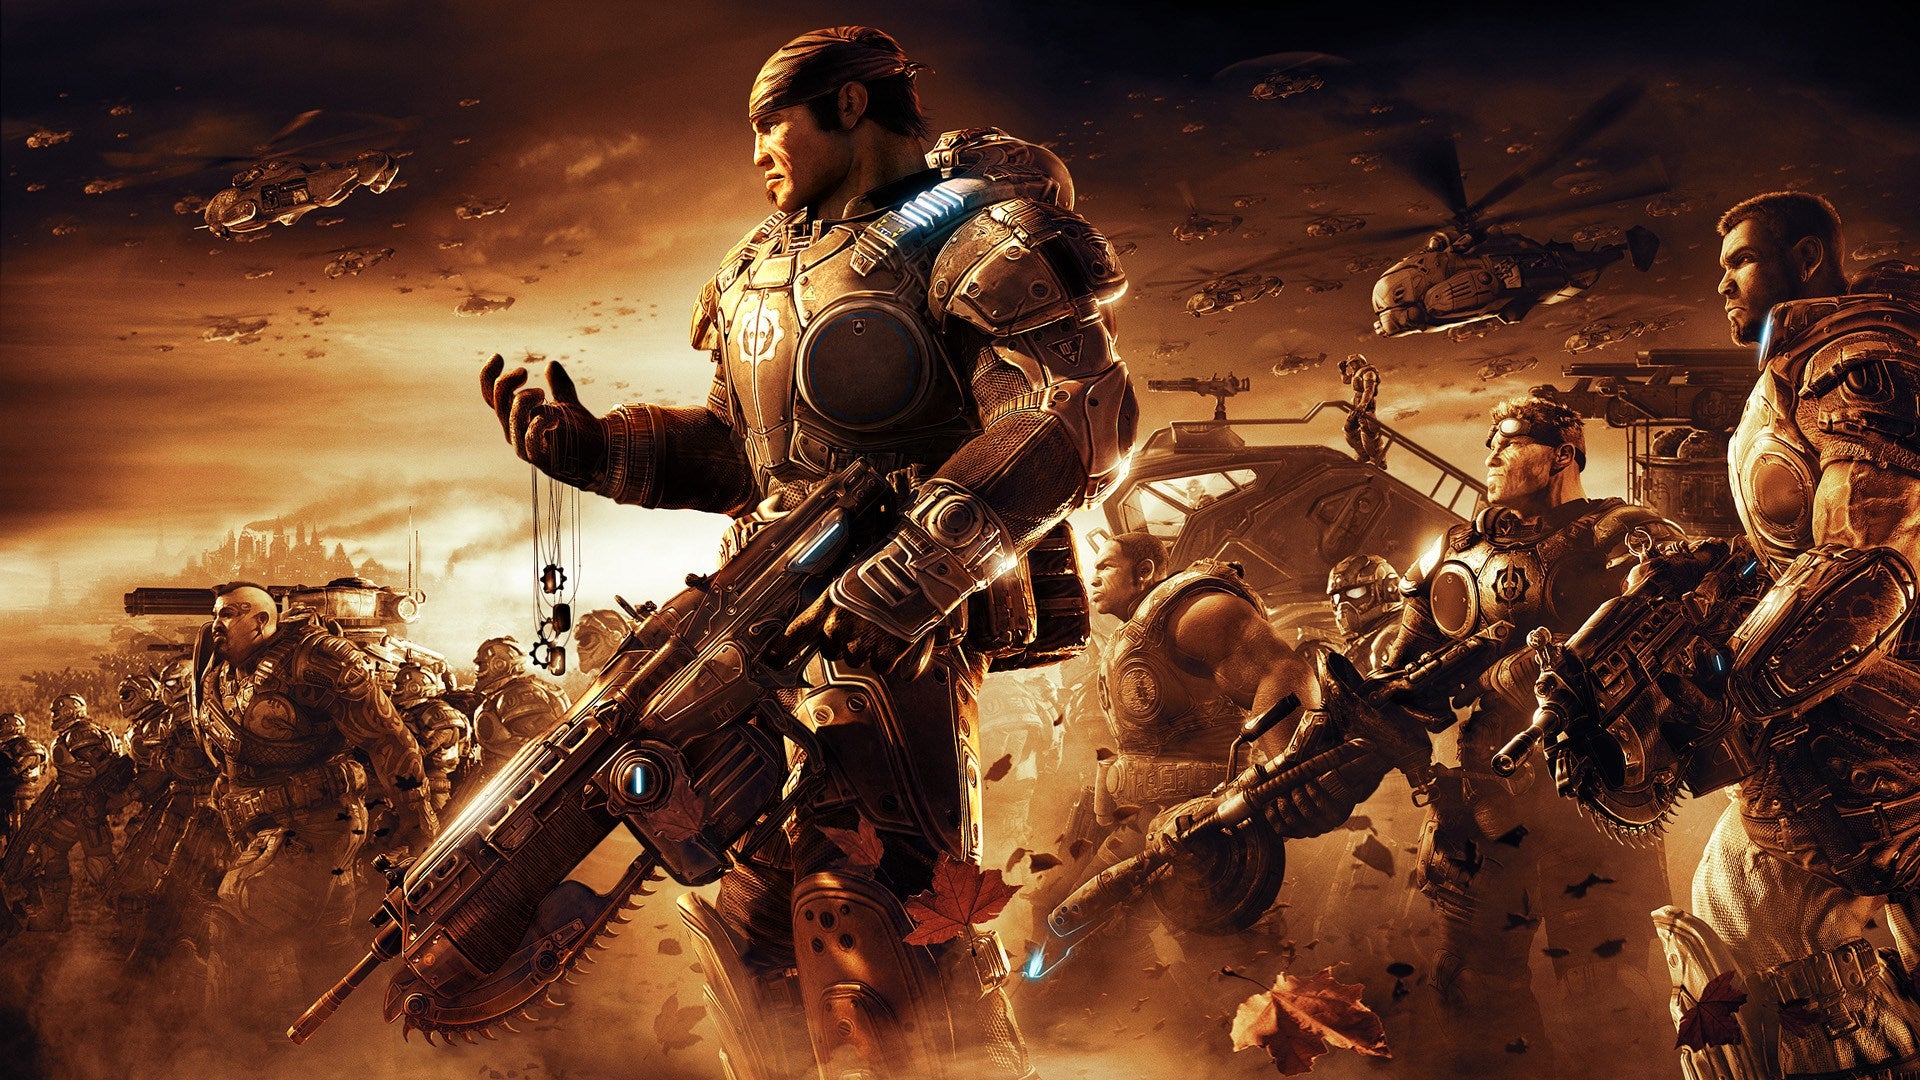 Marcus and the COGs get ready for war in a Gears Of War 2 promo shot.